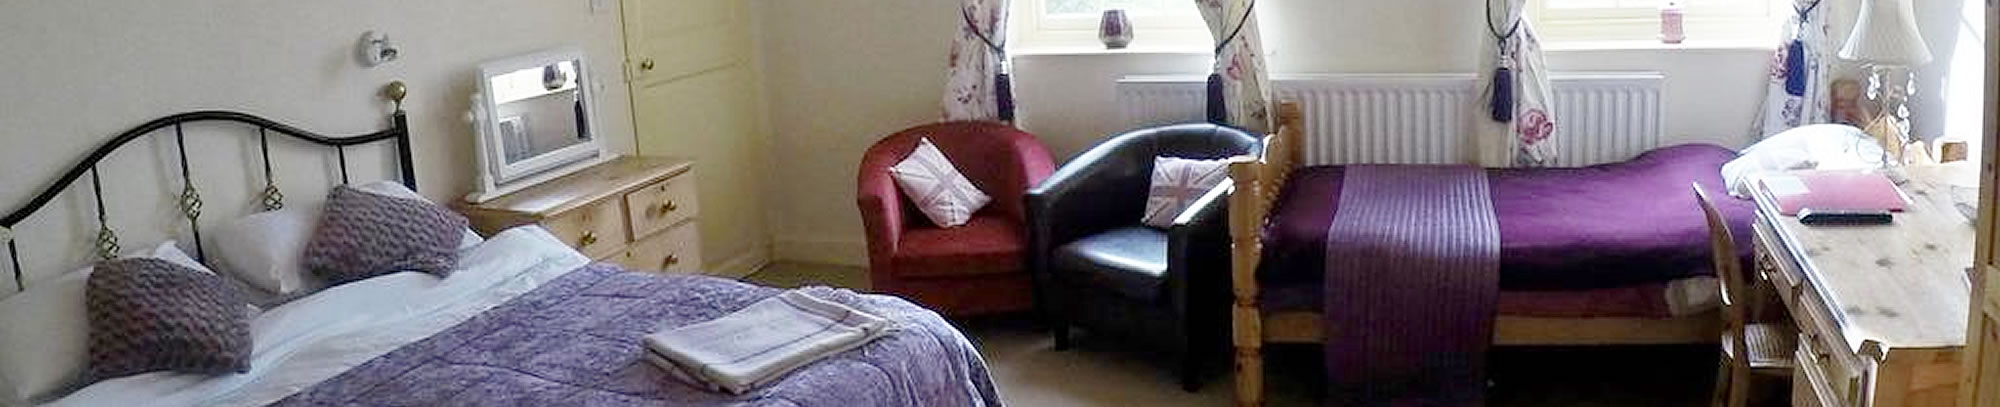 Whitchurch Farm Guest House - A Great location close to the town centre and Royal Shakespeare Theatre